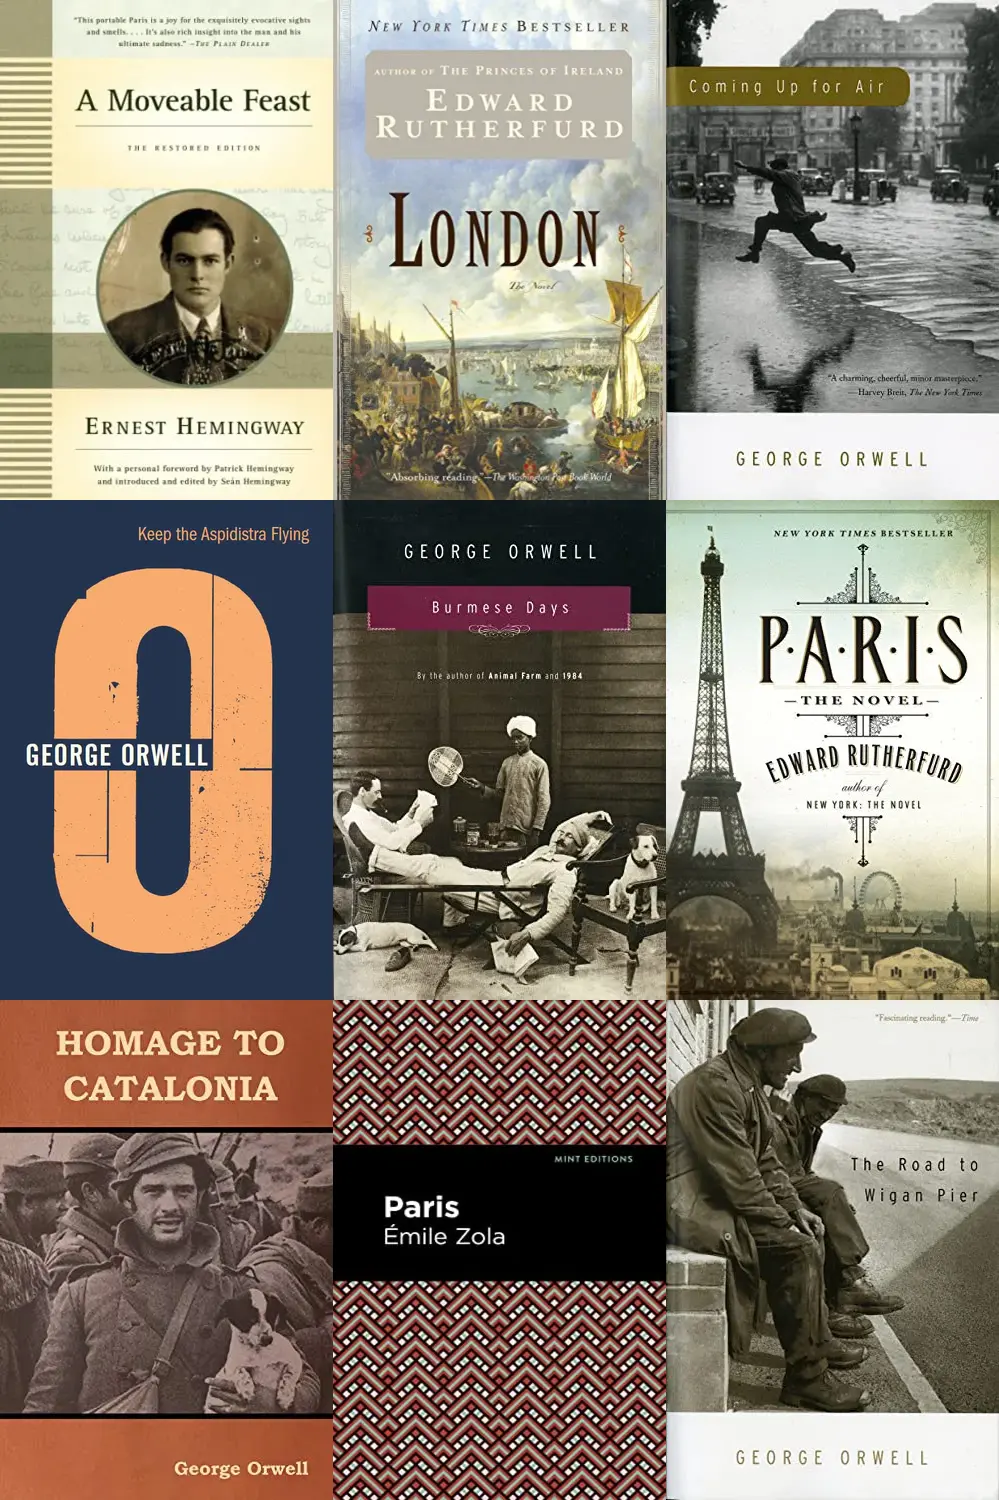 If I liked Down and Out in Paris and London by George Orwell, what should I